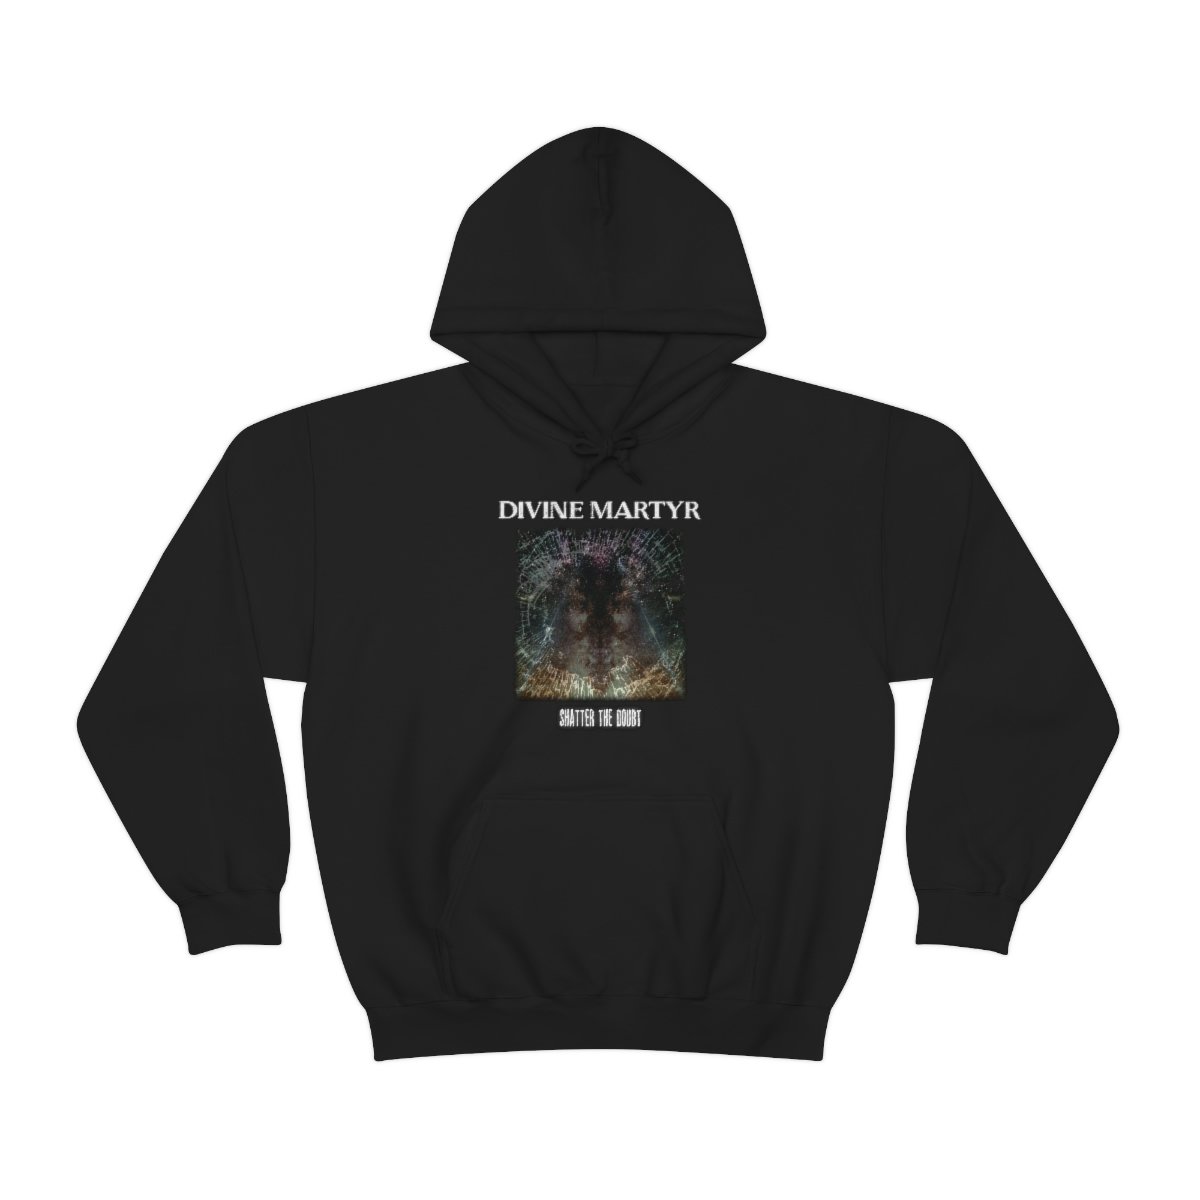 Divine Martyr – Shatter The Doubt Pullover Hooded Sweatshirt